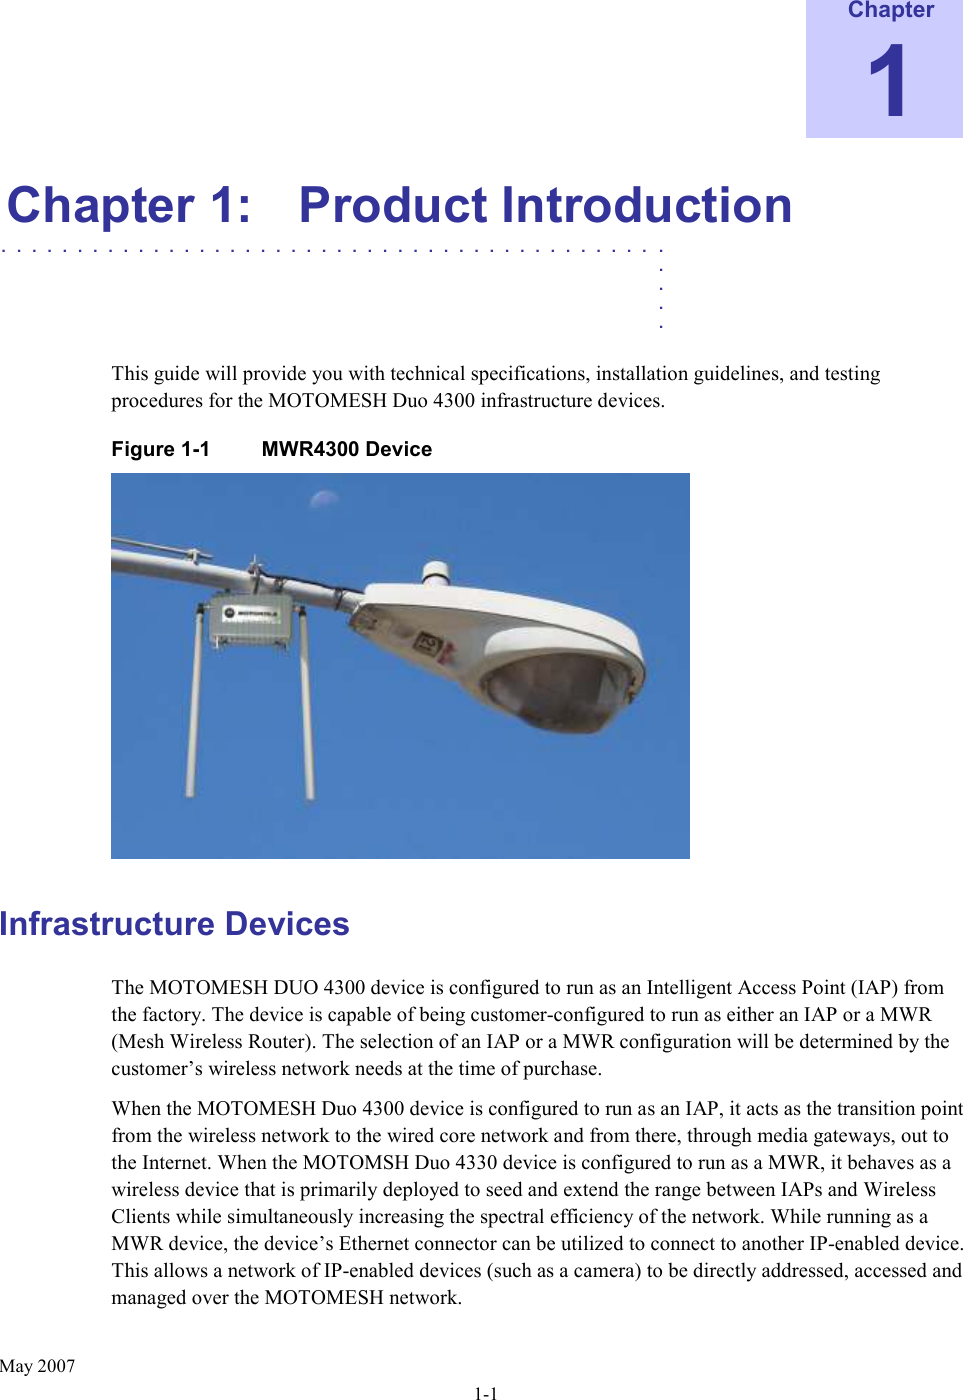    May 2007 1-1 Chapter 1 Chapter 1:  Product Introduction  ............................................   .    .    .    .  This guide will provide you with technical specifications, installation guidelines, and testing procedures for the MOTOMESH Duo 4300 infrastructure devices. Figure 1-1  MWR4300 Device   Infrastructure Devices The MOTOMESH DUO 4300 device is configured to run as an Intelligent Access Point (IAP) from the factory. The device is capable of being customer-configured to run as either an IAP or a MWR (Mesh Wireless Router). The selection of an IAP or a MWR configuration will be determined by the customer’s wireless network needs at the time of purchase. When the MOTOMESH Duo 4300 device is configured to run as an IAP, it acts as the transition point from the wireless network to the wired core network and from there, through media gateways, out to the Internet. When the MOTOMSH Duo 4330 device is configured to run as a MWR, it behaves as a wireless device that is primarily deployed to seed and extend the range between IAPs and Wireless Clients while simultaneously increasing the spectral efficiency of the network. While running as a MWR device, the device’s Ethernet connector can be utilized to connect to another IP-enabled device. This allows a network of IP-enabled devices (such as a camera) to be directly addressed, accessed and managed over the MOTOMESH network.  